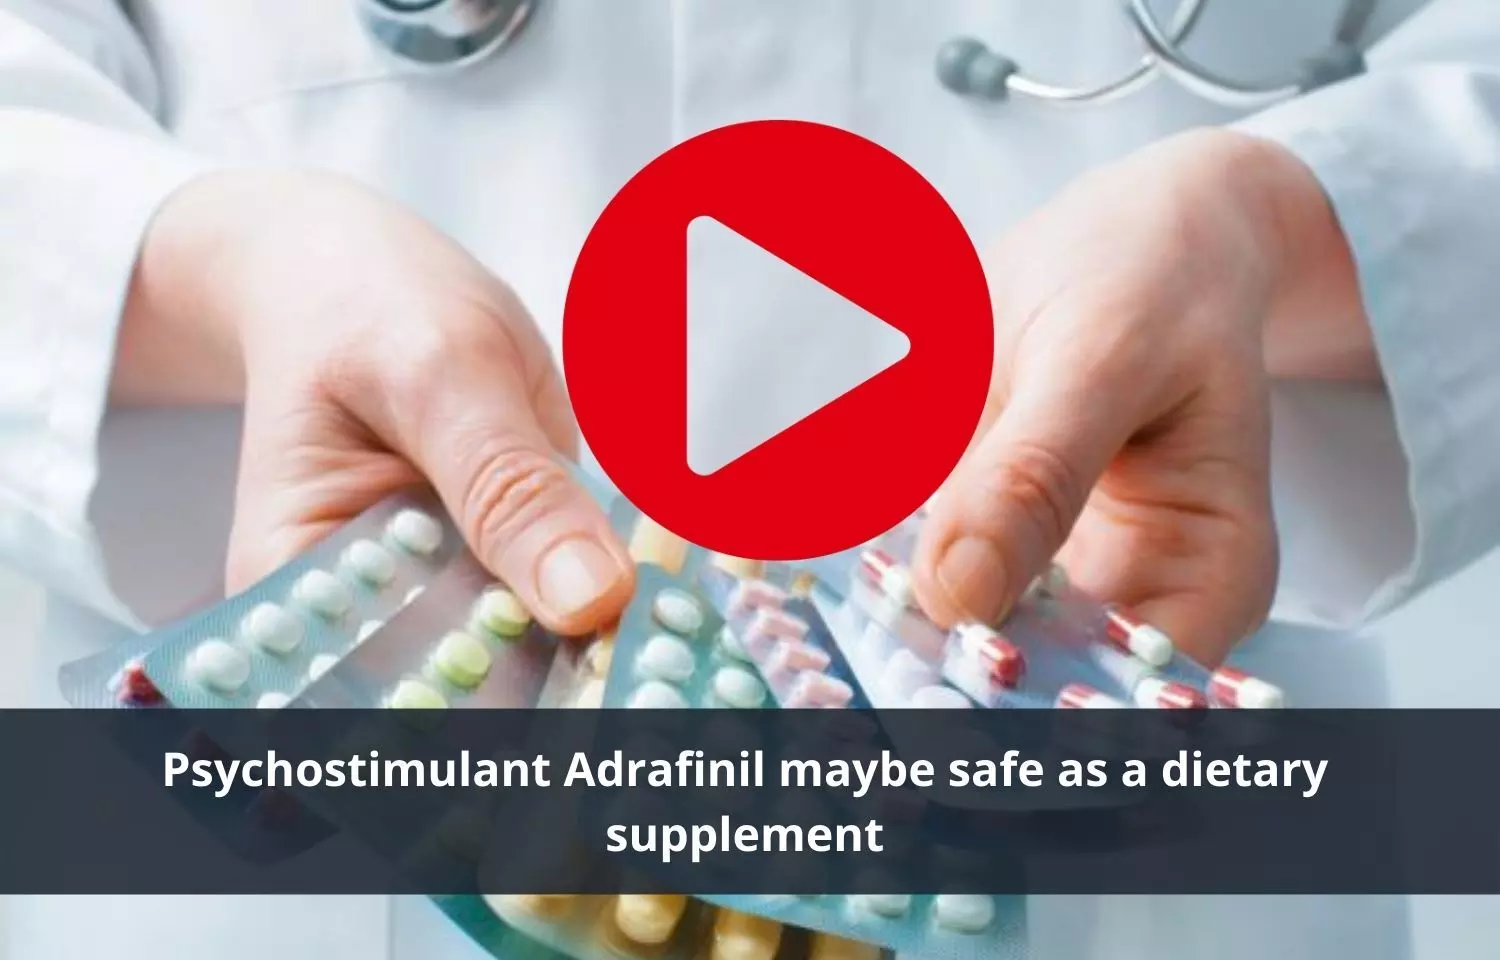 Psychostimulant Adrafinil maybe safe as a dietary supplement